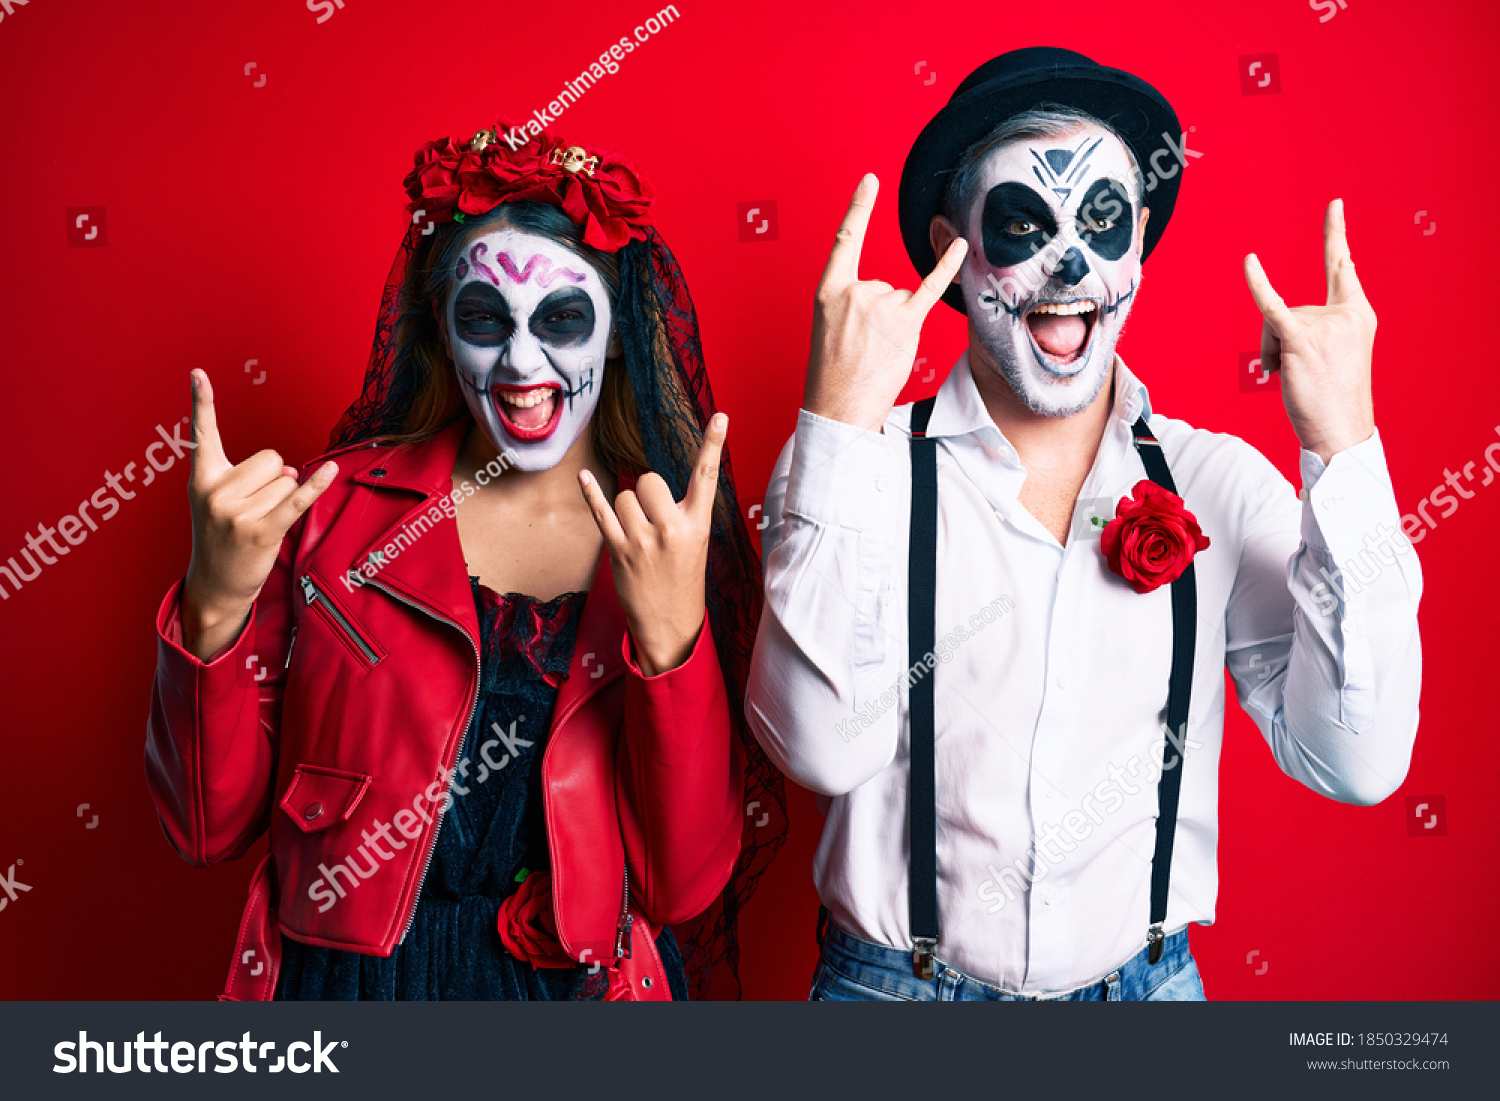 Couple Wearing Day Dead Costume Over Stock Photo 1850329474 | Shutterstock